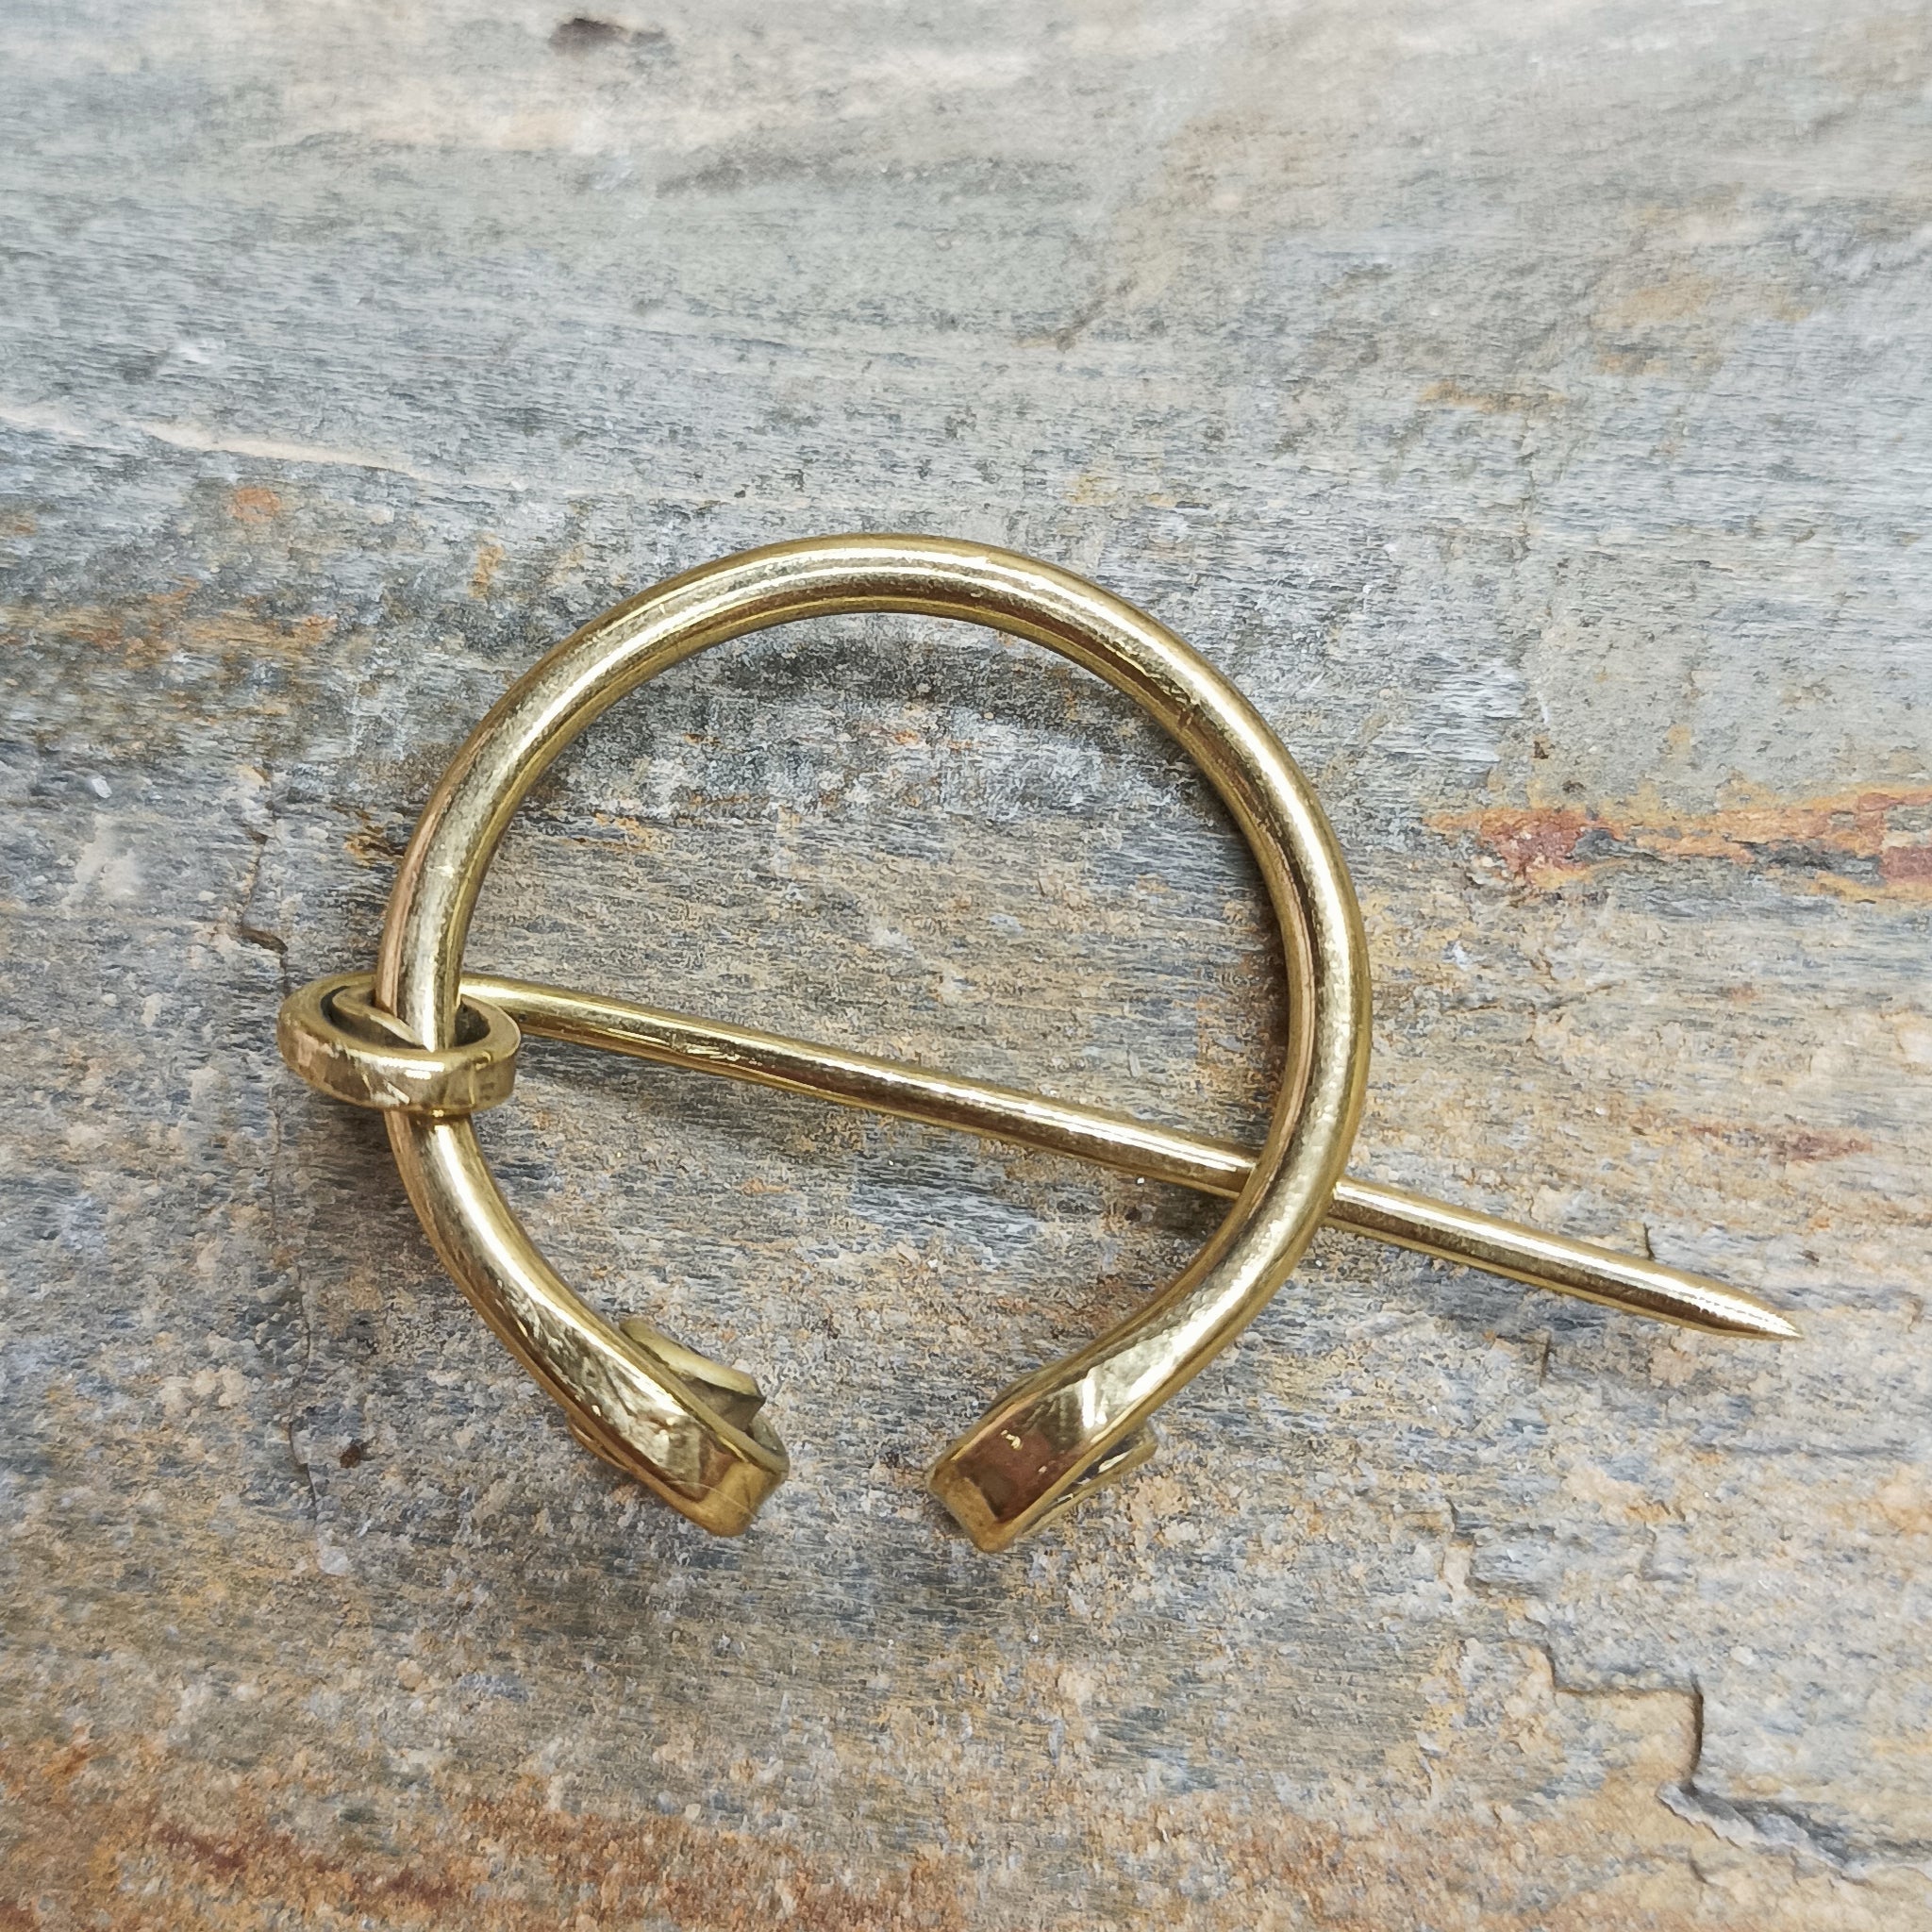 30mm Brass Cloak Pin / Clothes Pin on Rock - Back View